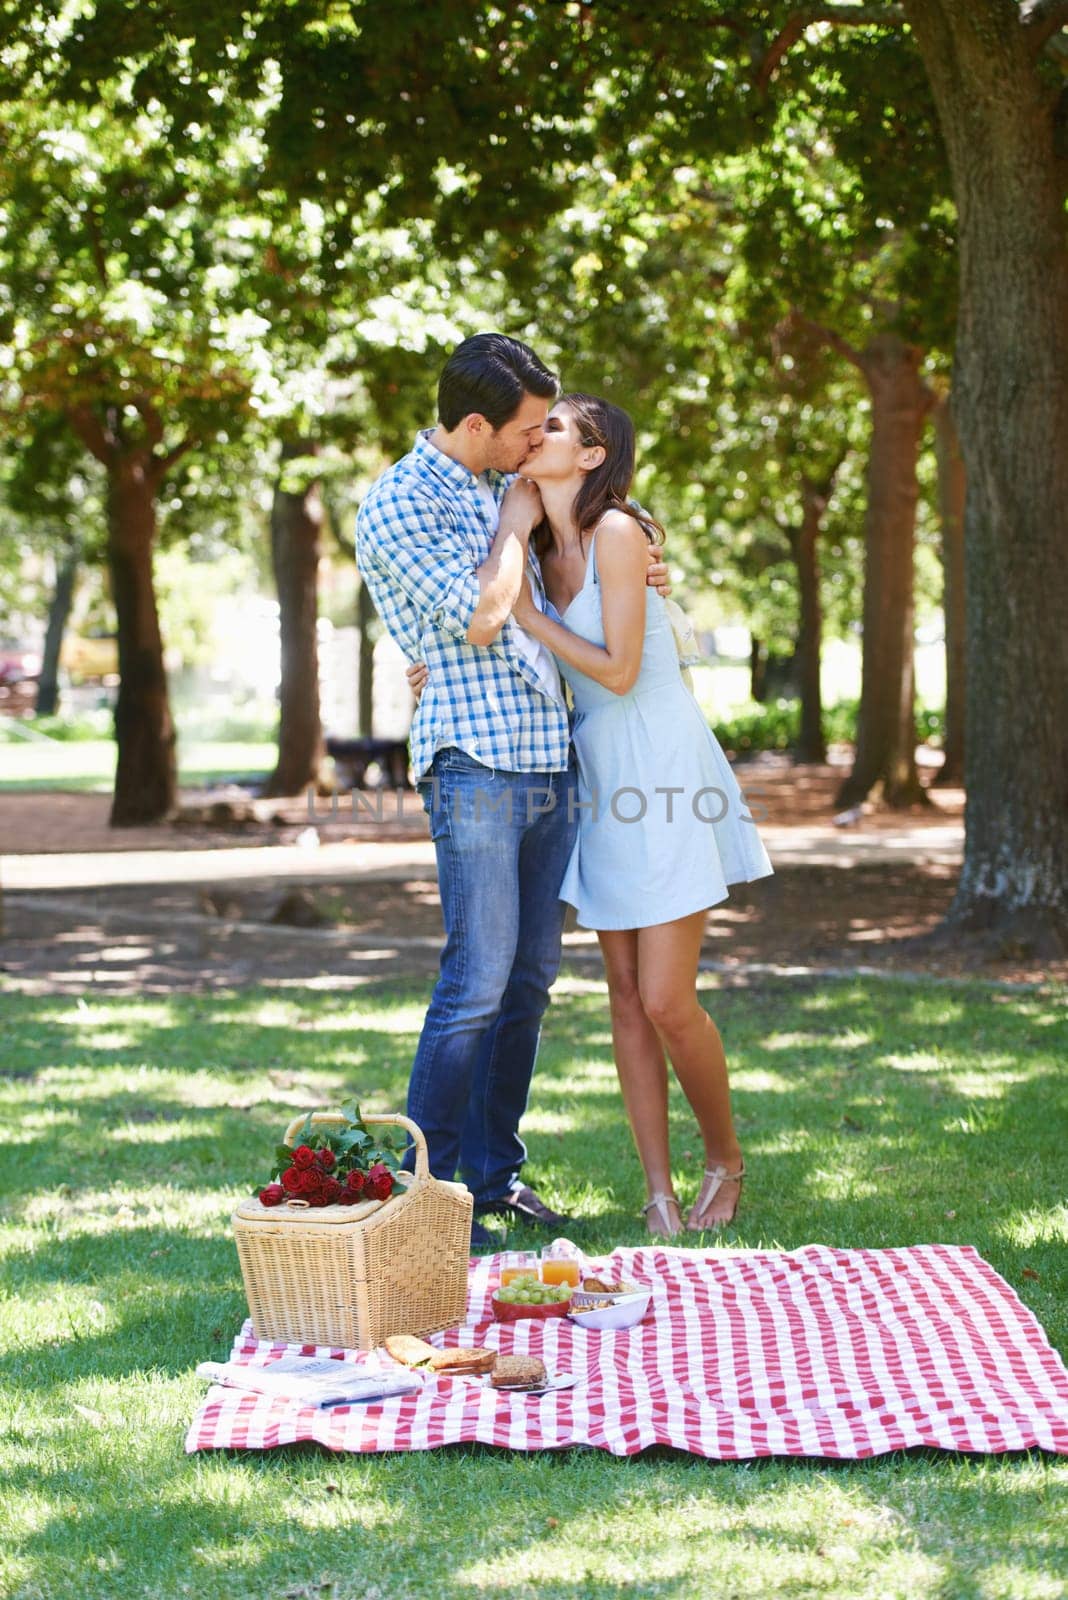 Sharing a romantic afternoon together. A romantic young couple enjoying a picnic in the summer sun. by YuriArcurs